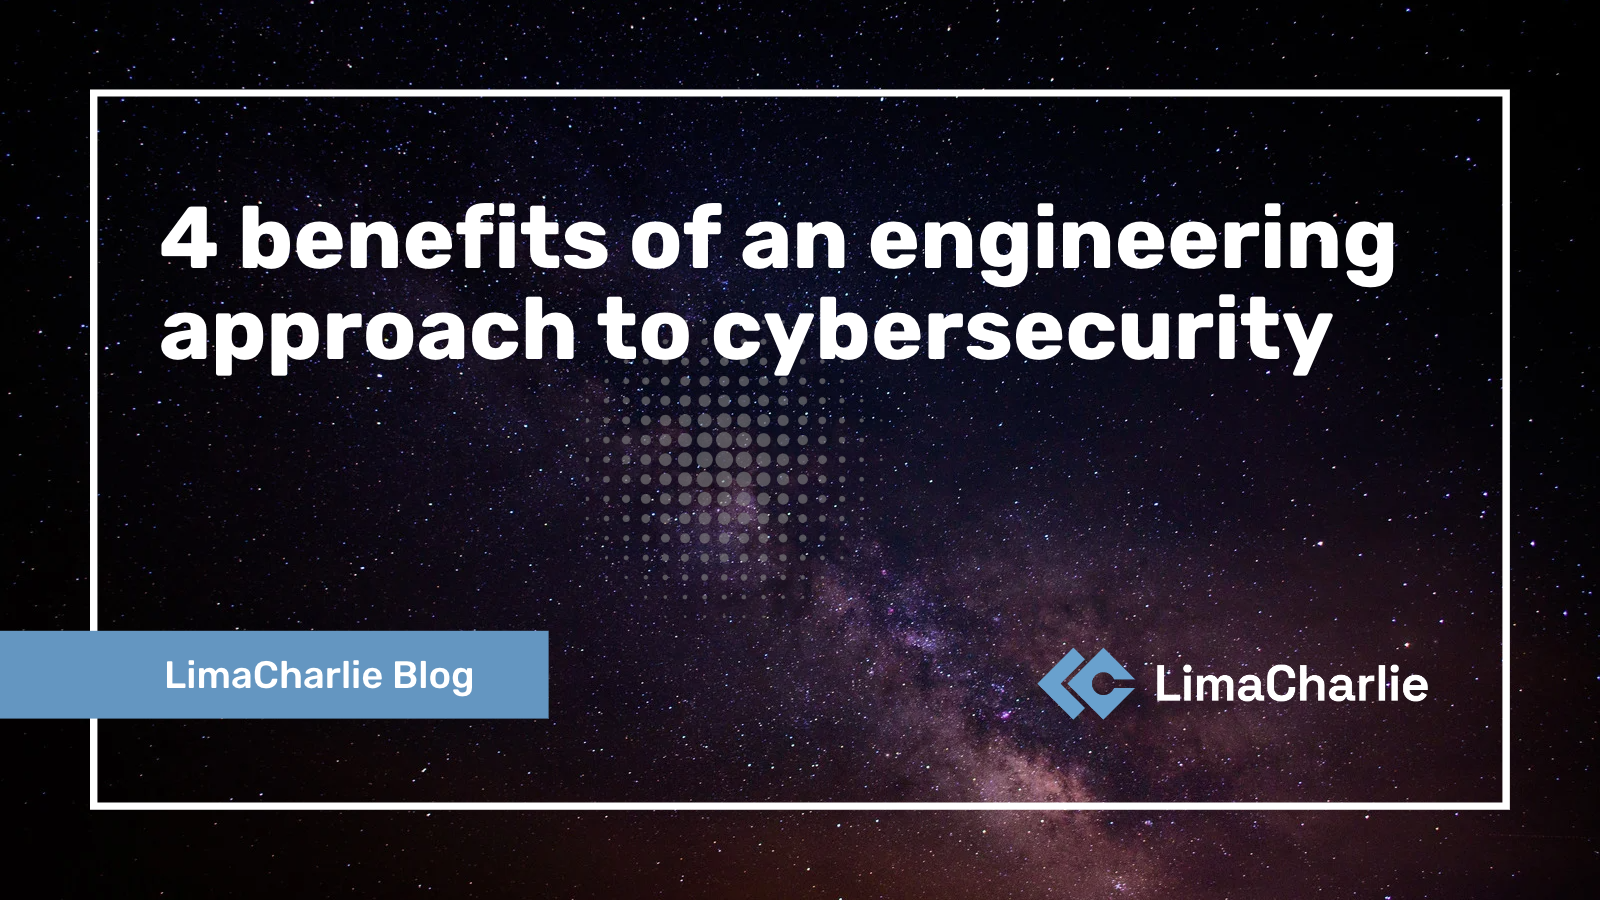 4 benefits of an engineering approach to cybersecurity